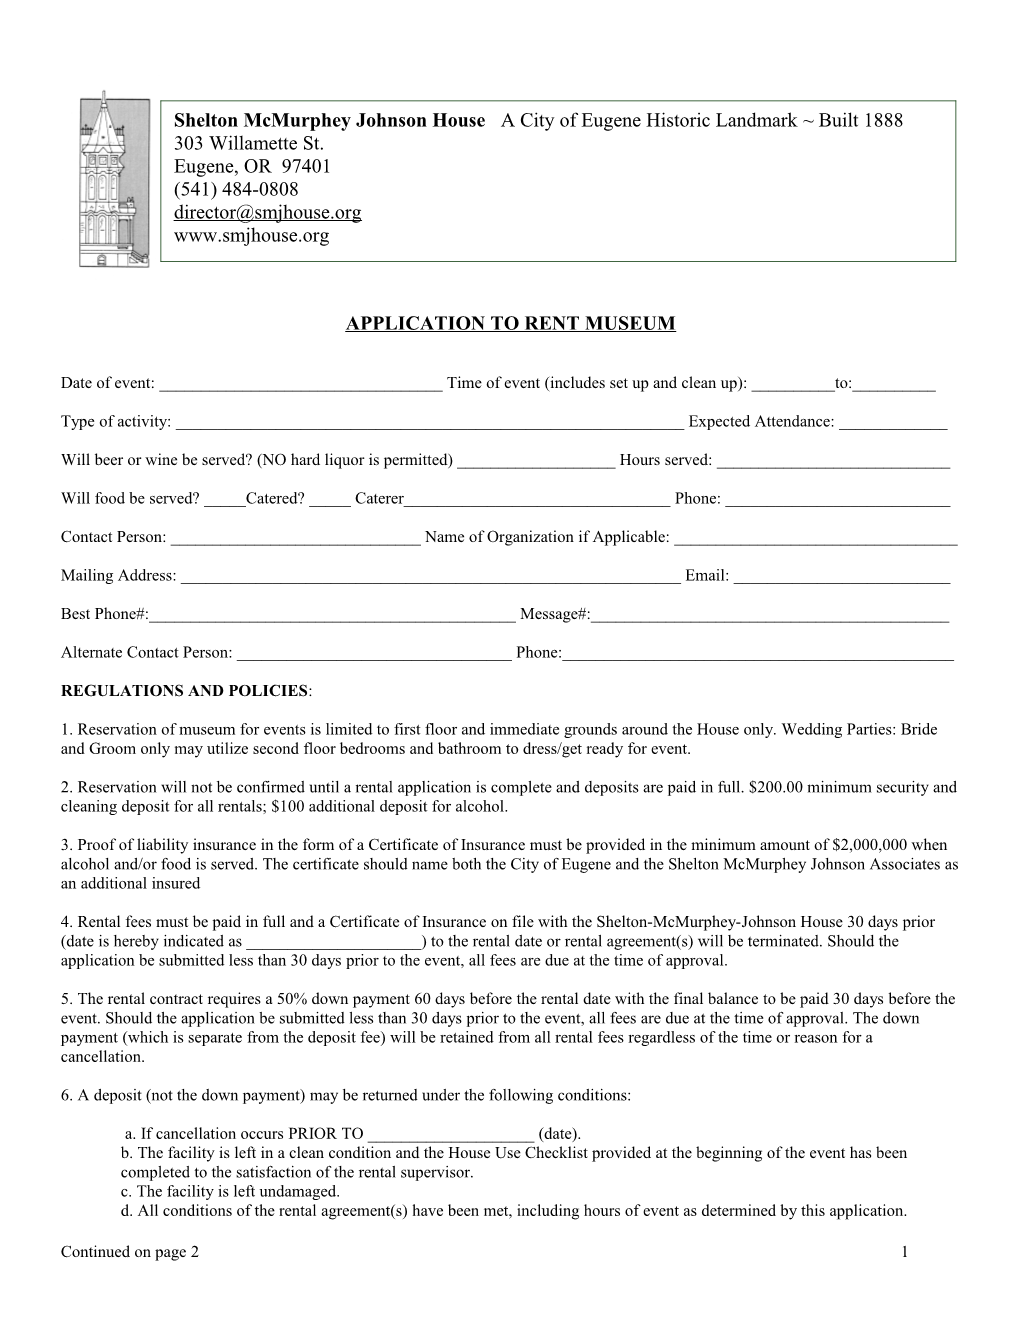 Application to Rent Museum